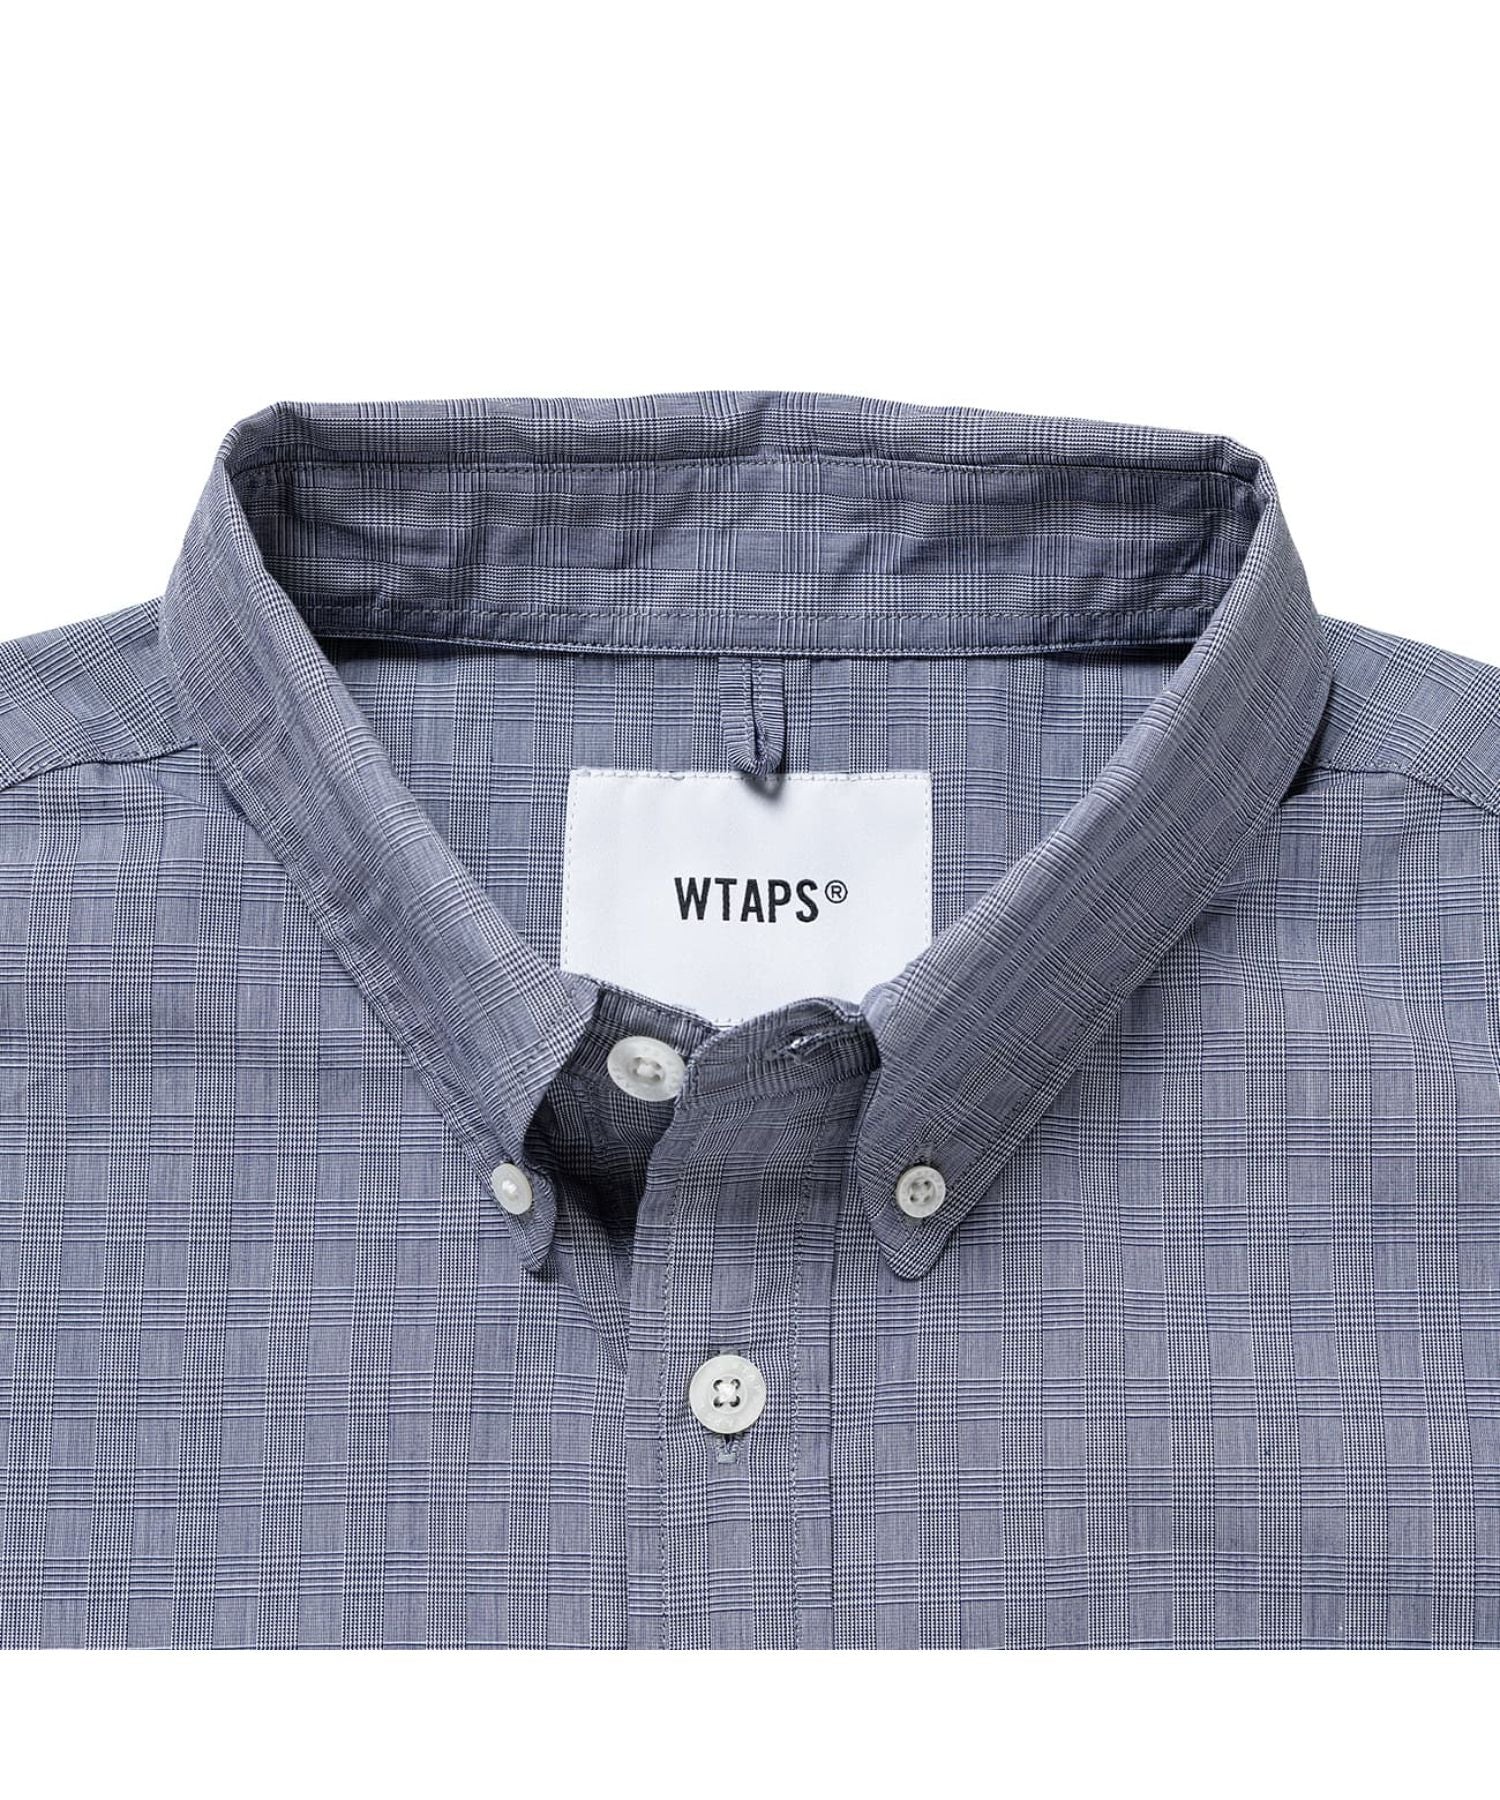 wtaps BD 02 BROADCLOTH. TEXTILE. PROTECTシャツ